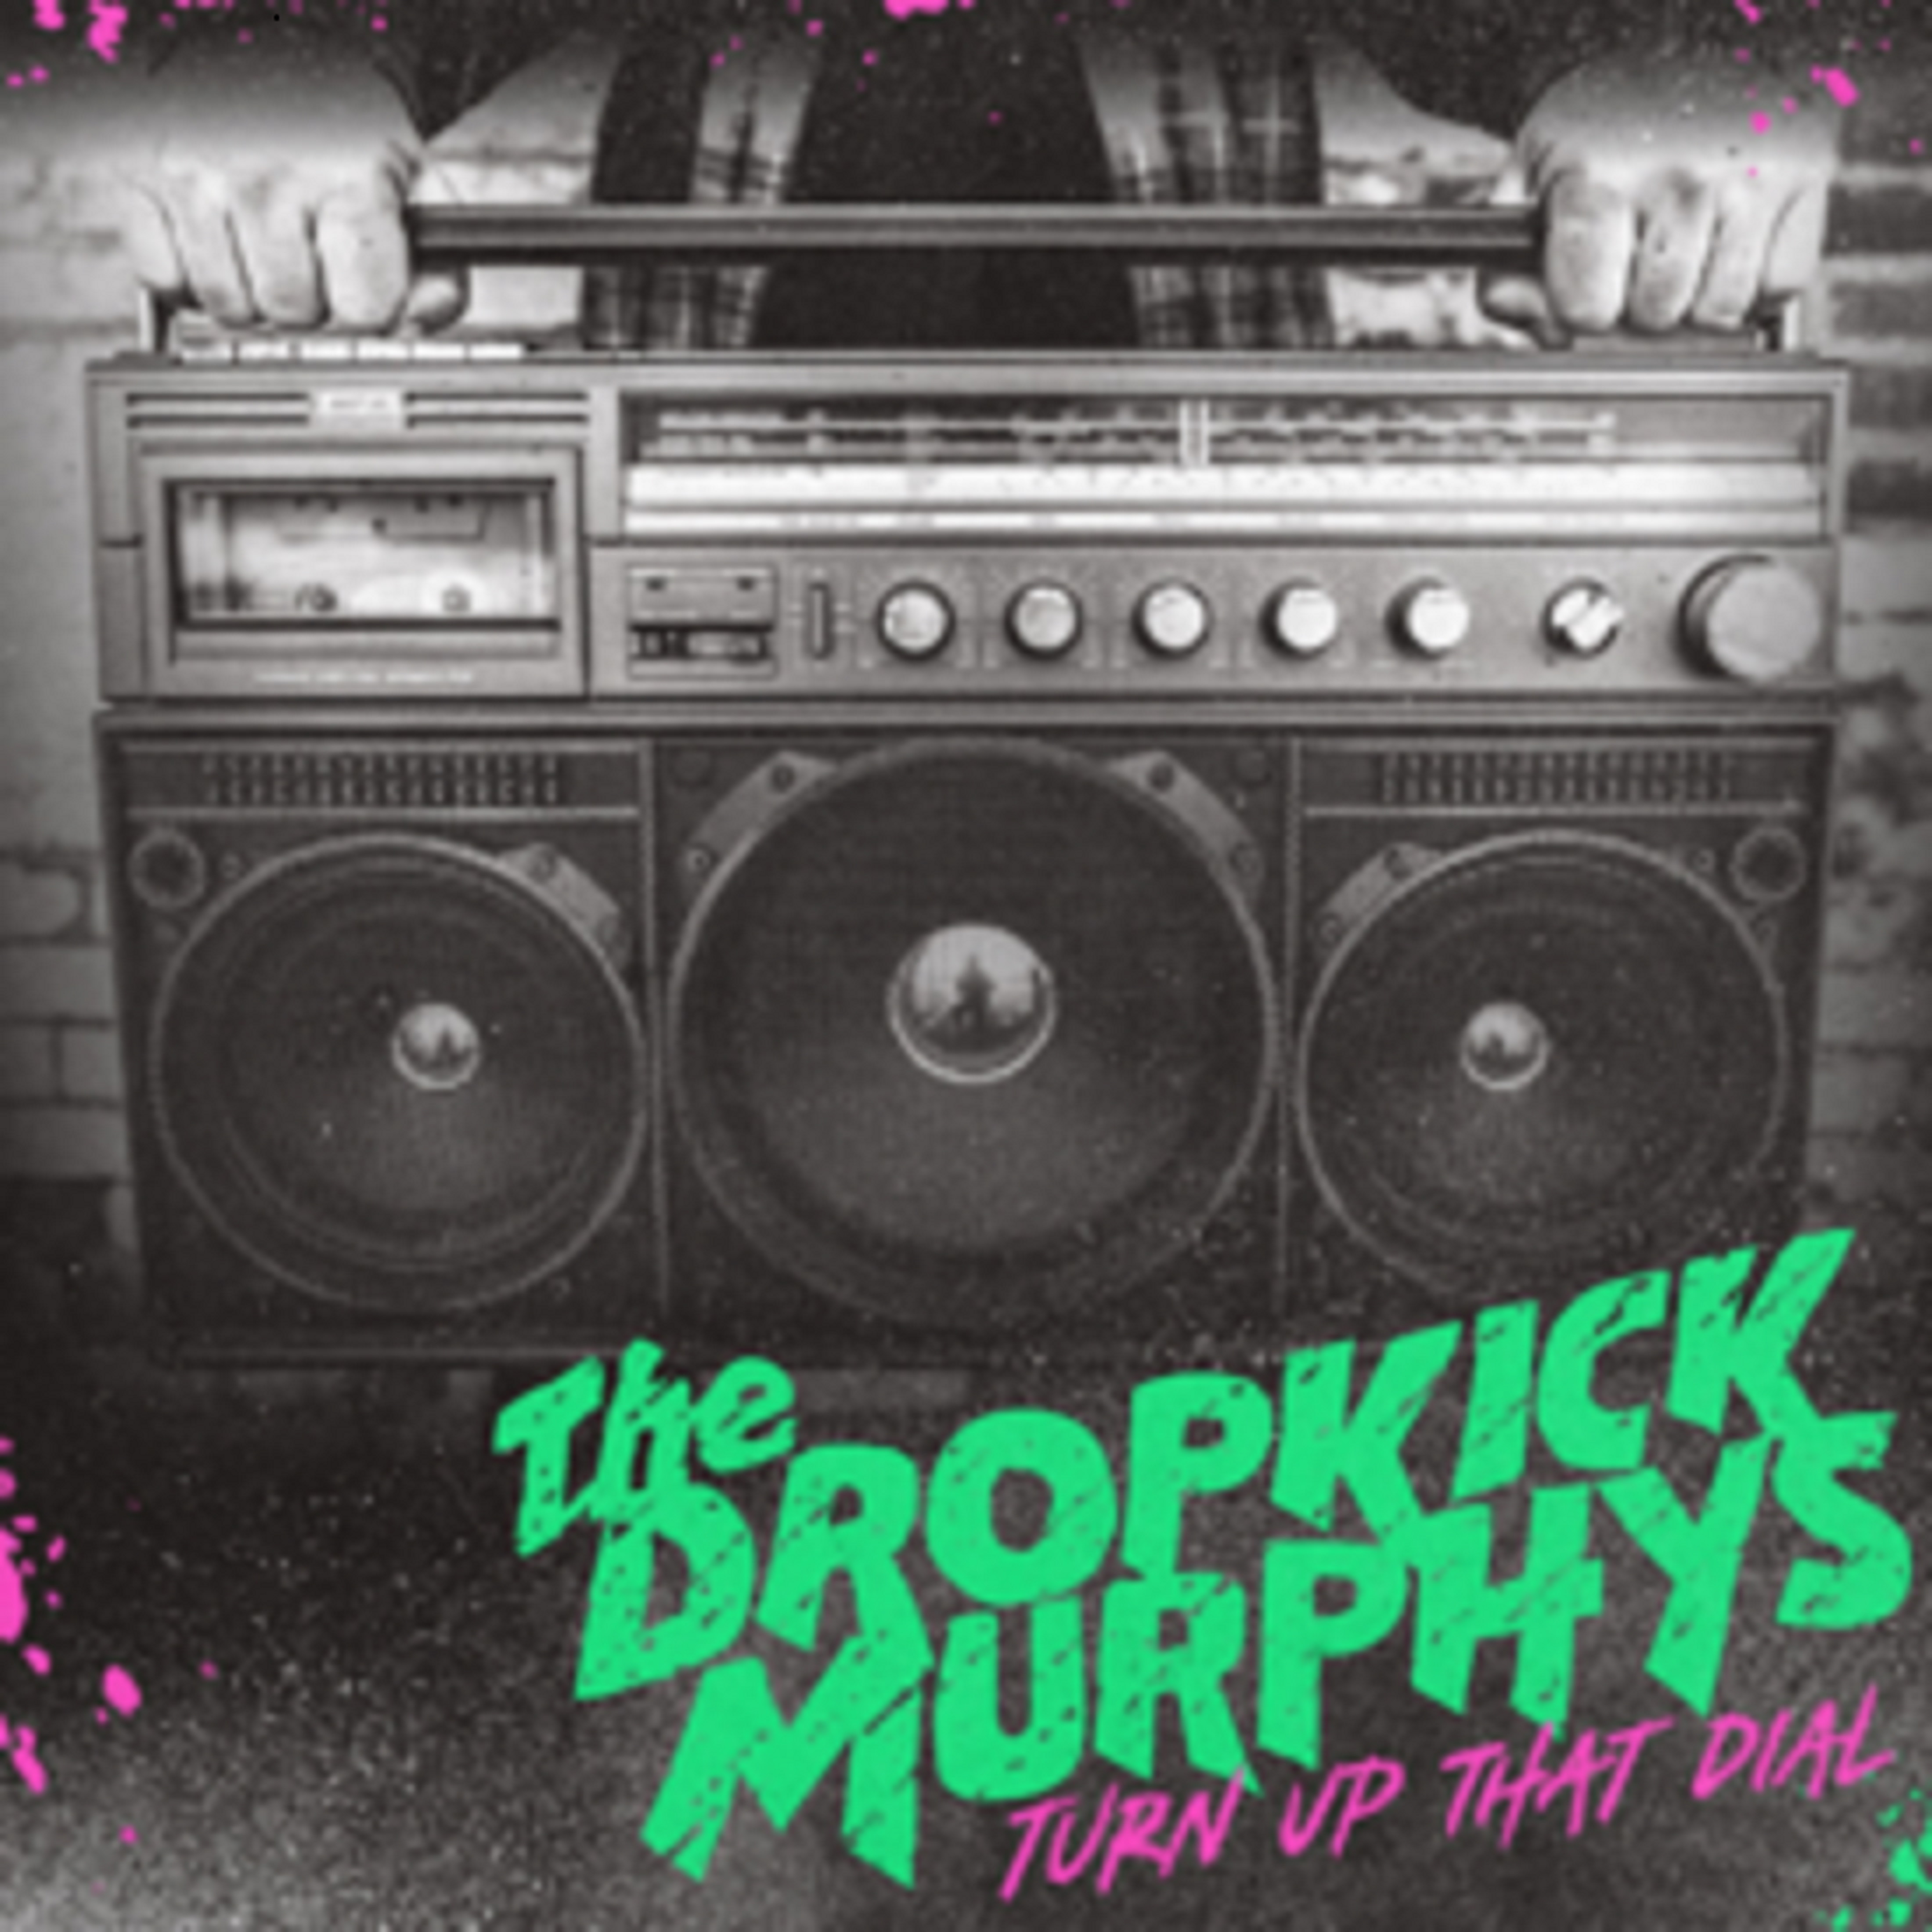 Dropkick Murphys' New Album Turn Up That Dial Out Now; Album Release Party Live Stream Tonight, 5/1